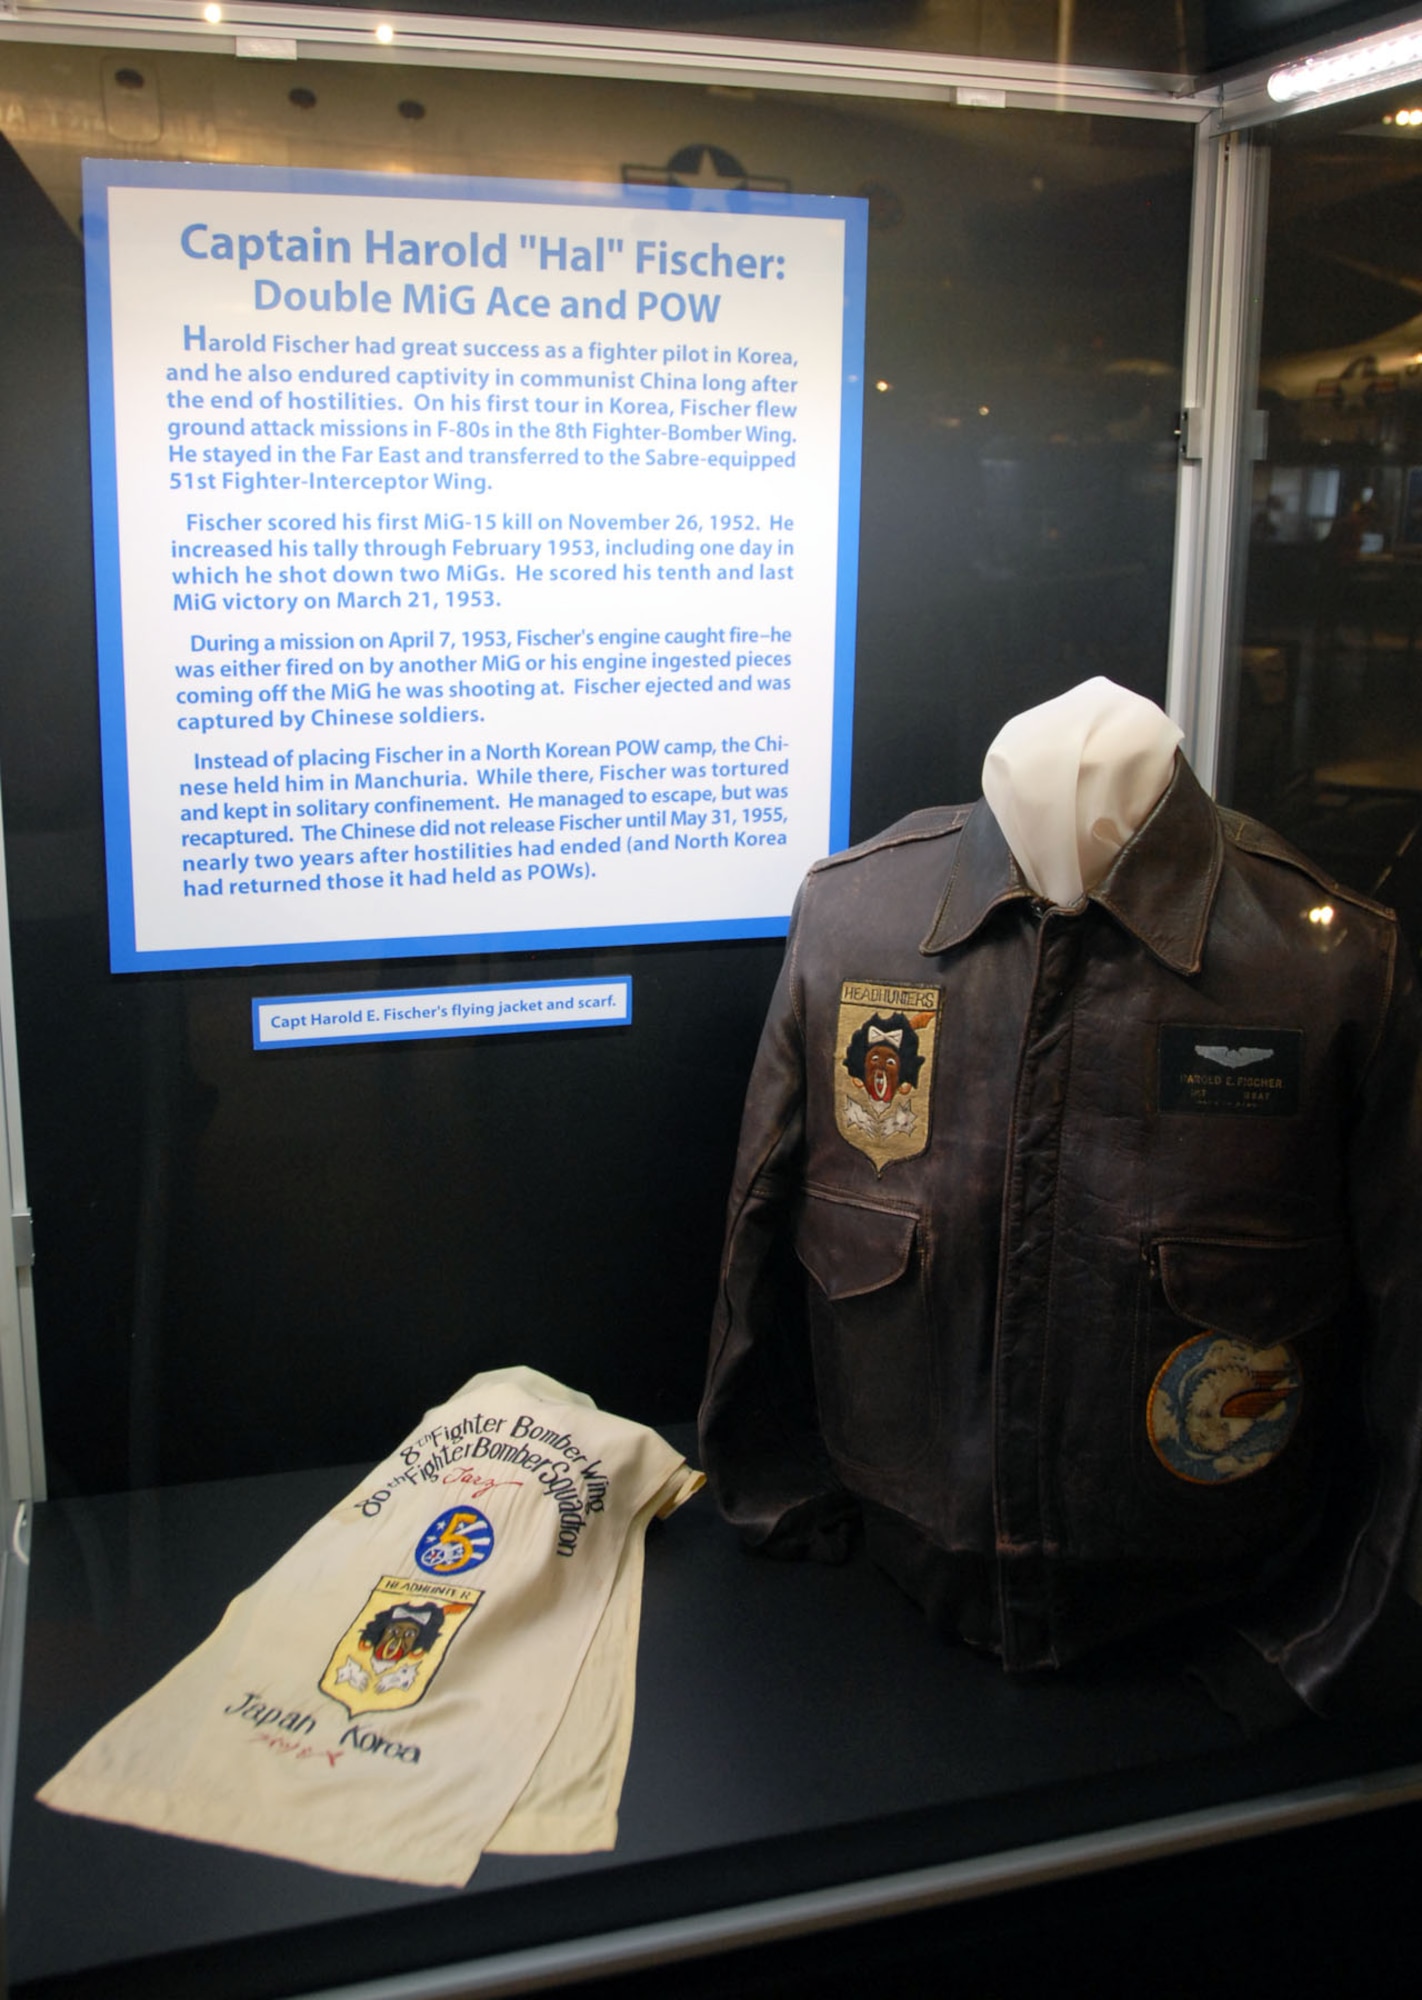 DAYTON, Ohio -- Capt. Harold "Hal" Fischer exhibit in the Korean War Gallery at the National Museum of the U.S. Air Force. (U.S. Air Force photo)